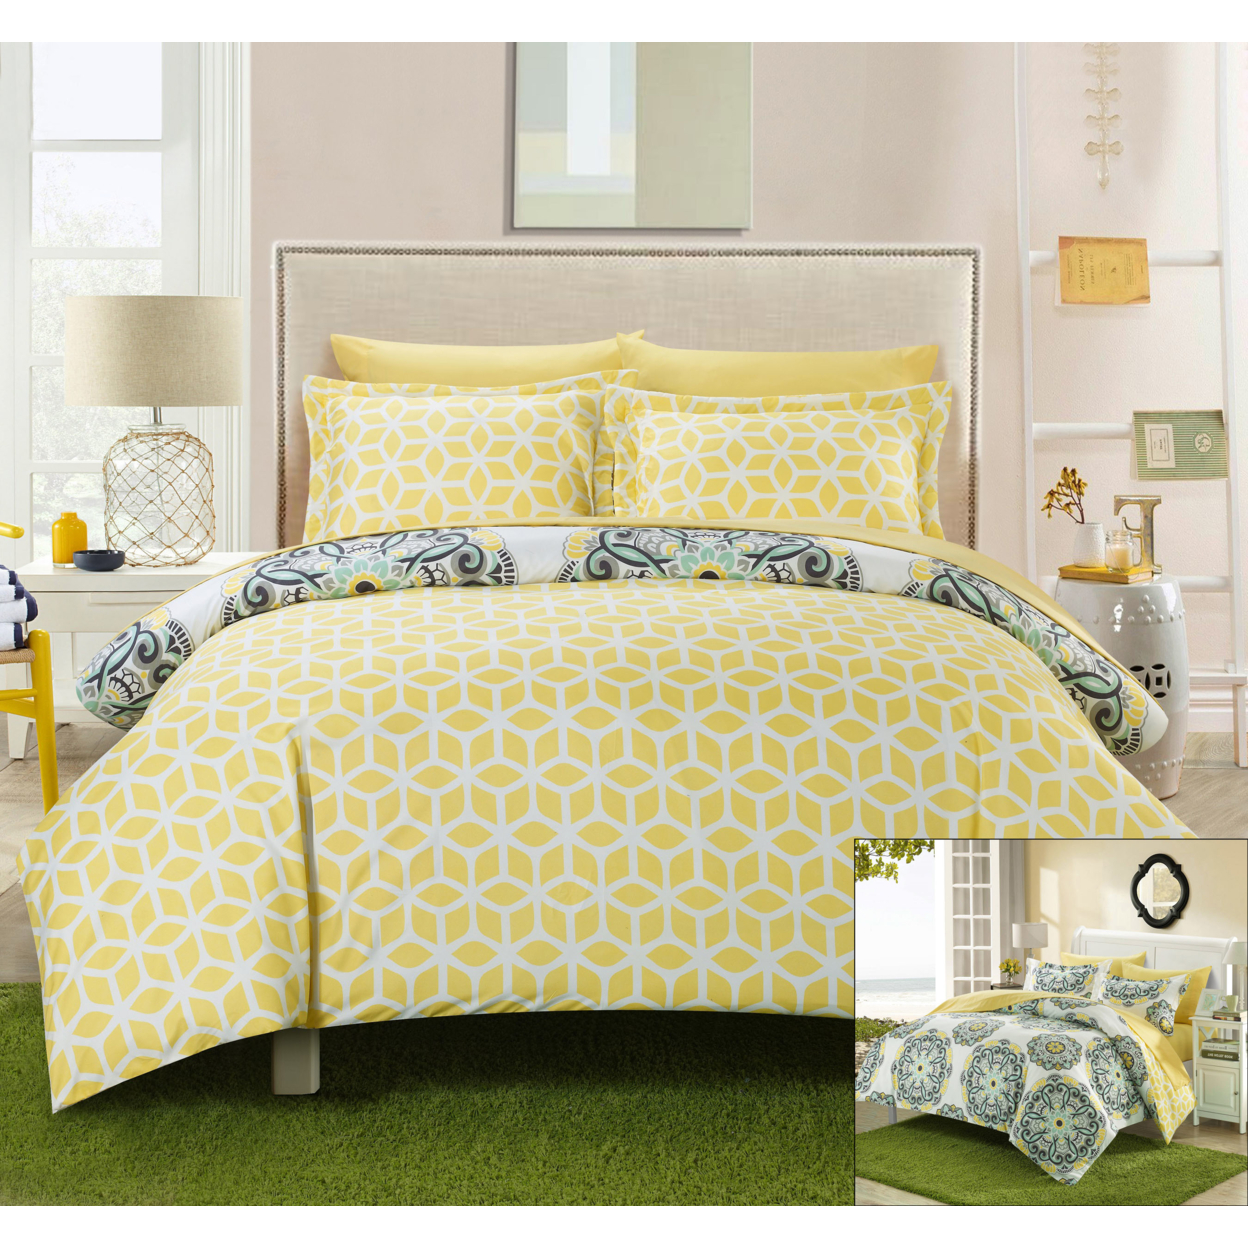 2/3 Piece Majorca Super Soft Microfiber Large Printed Medallion REVERSIBLE With Geometric Printed Backing Duvet Set - Yellow, Twin